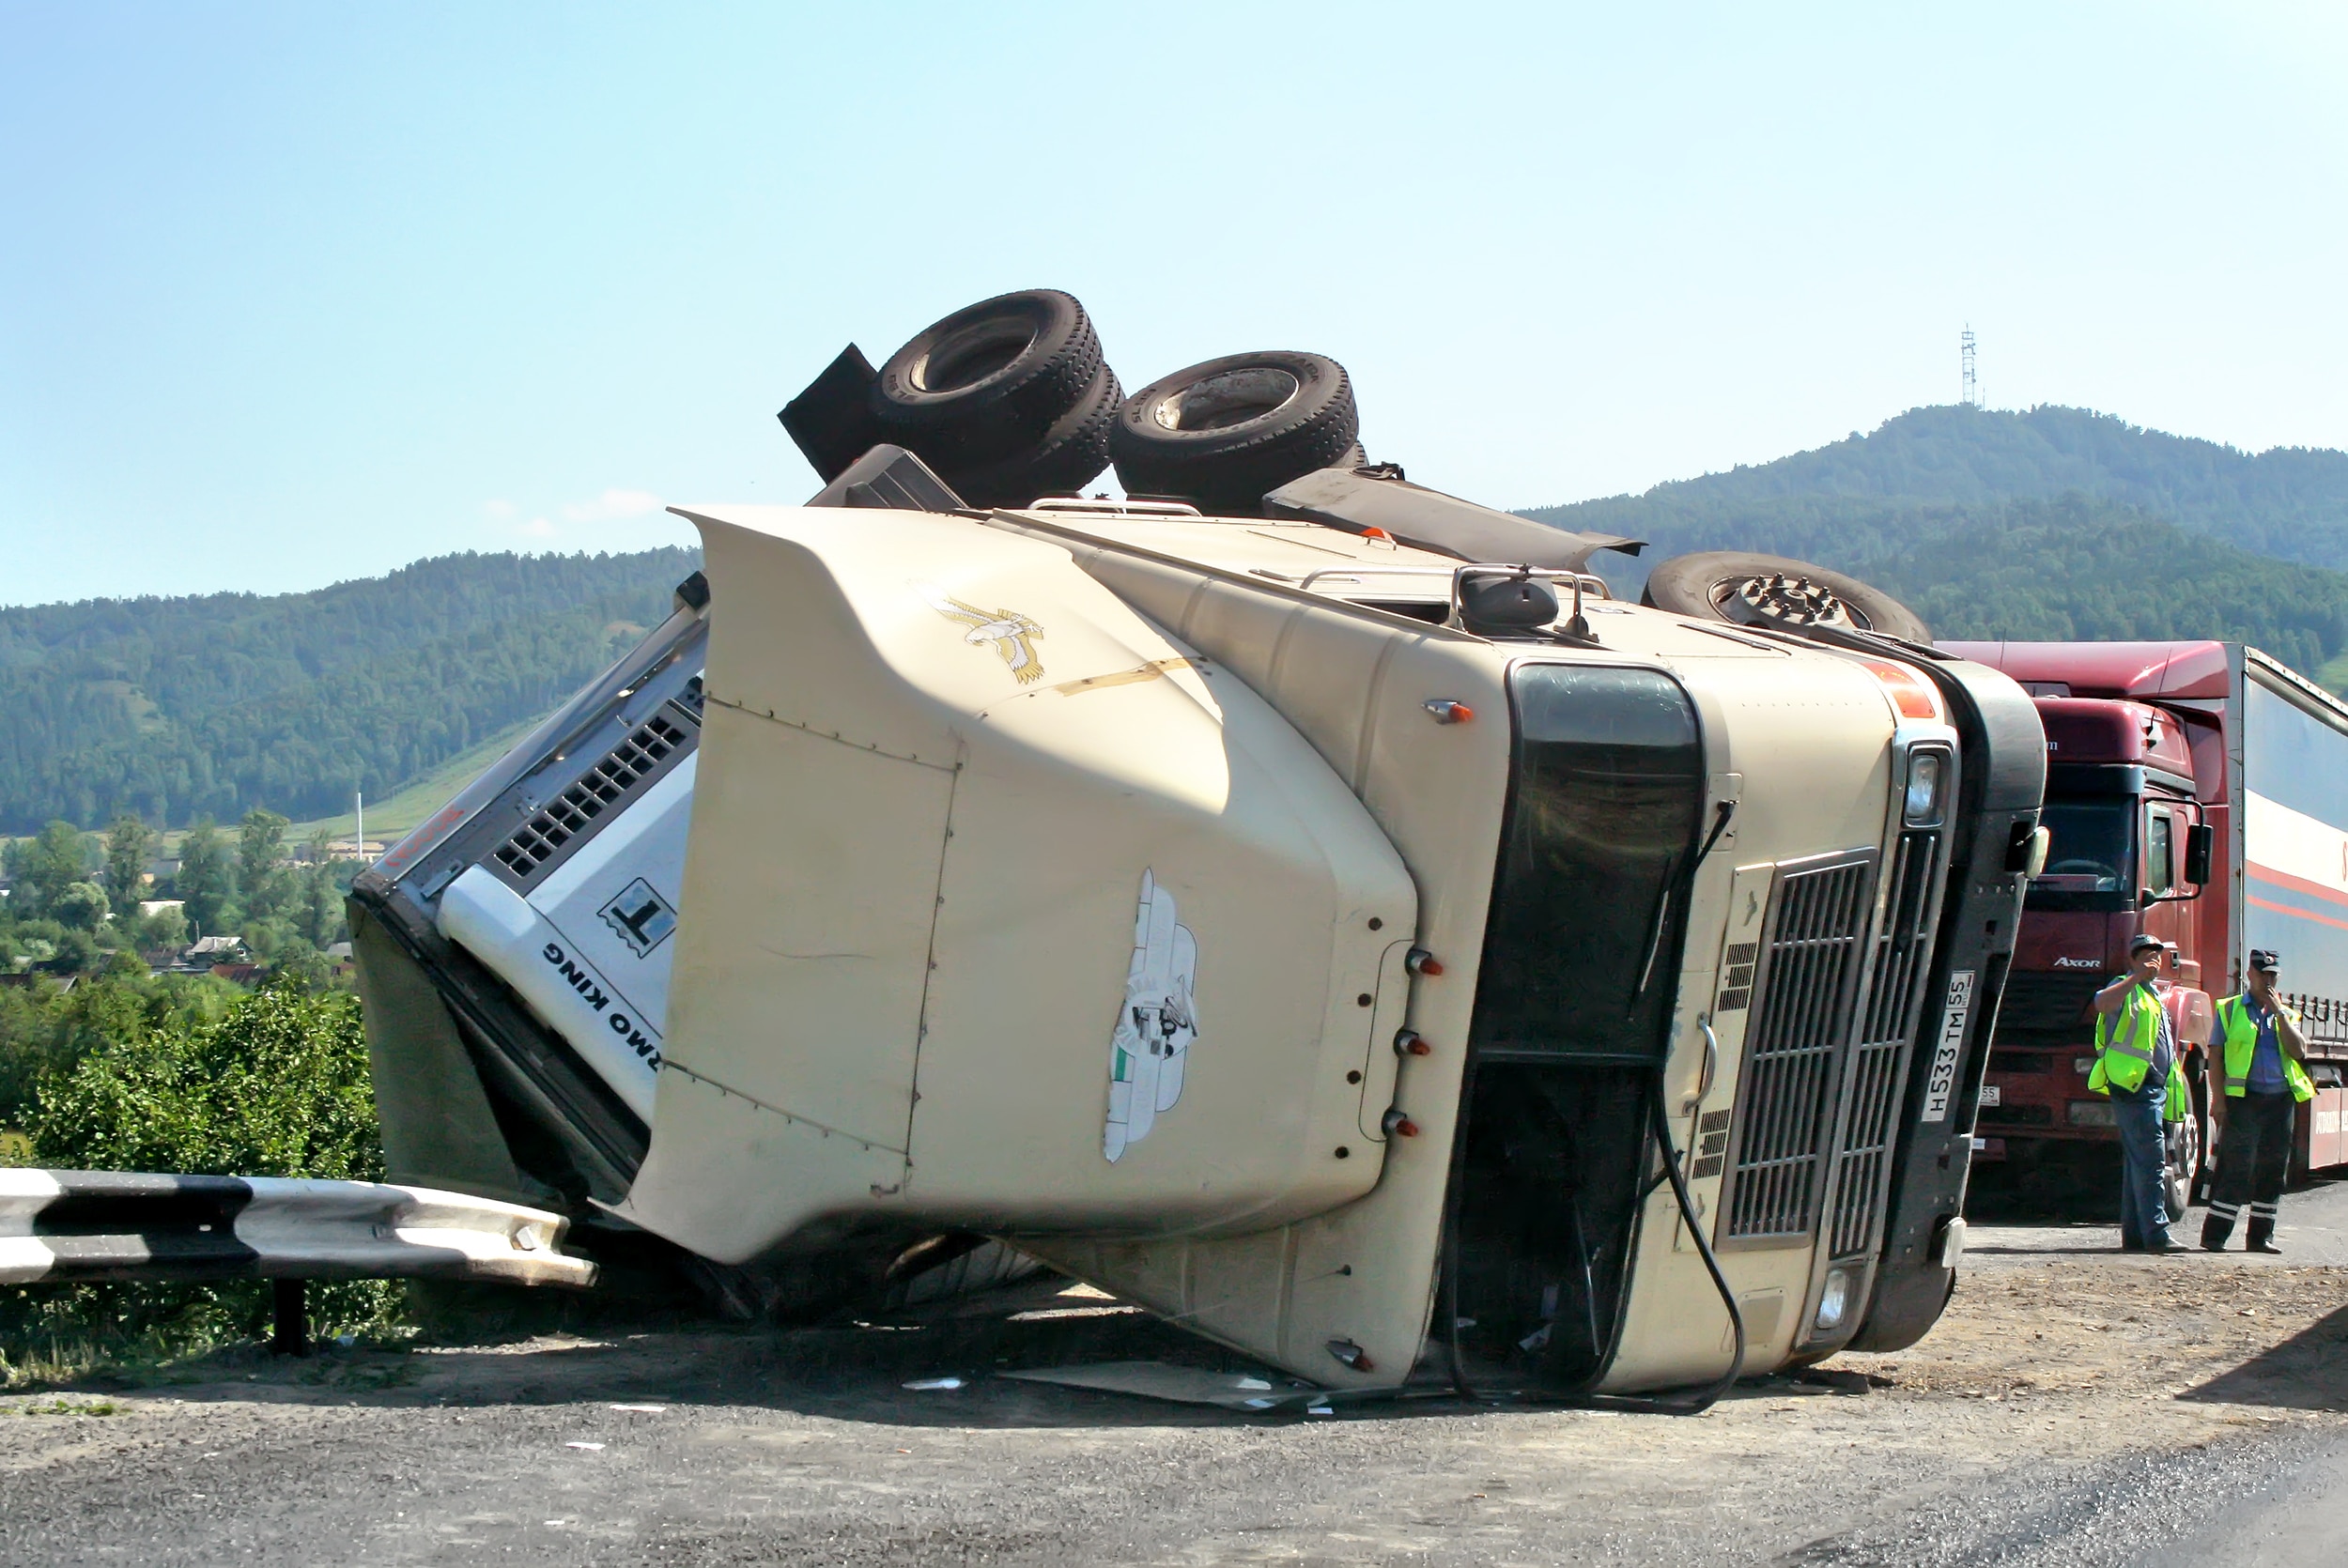 Truck Accident Cases are Overall More Serious than Those Involving Cars